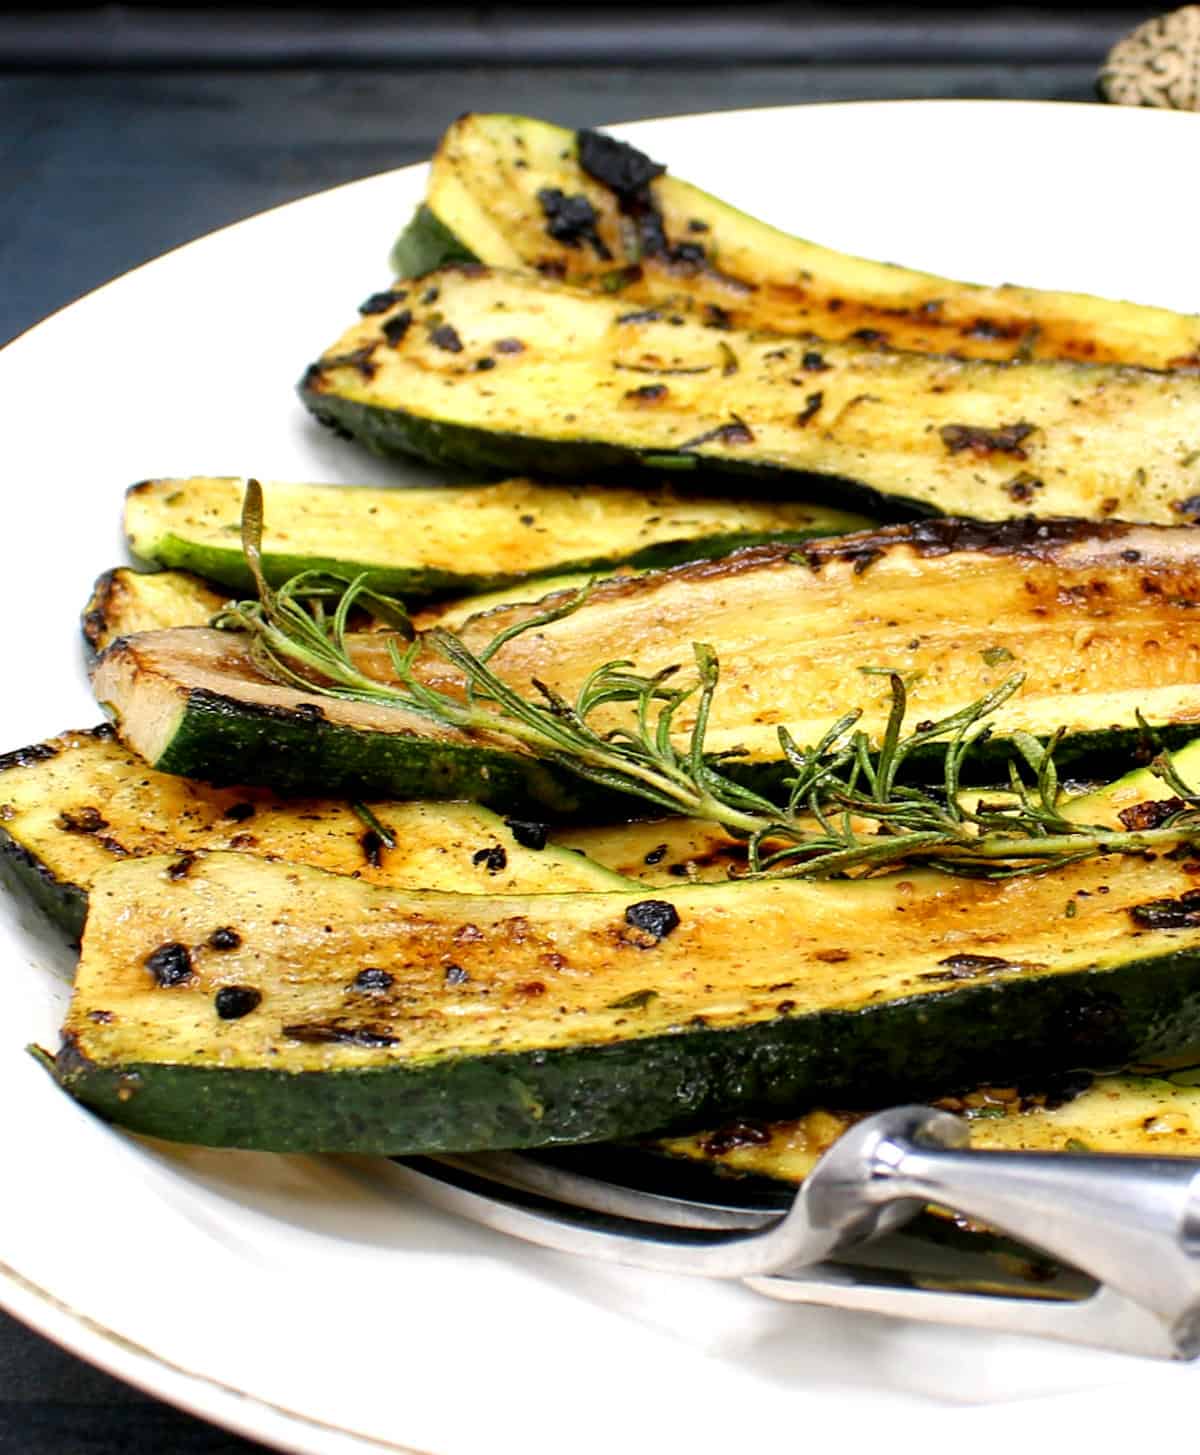 Closeup image of slices of pan roasted zucchini with a rosemary sprig.